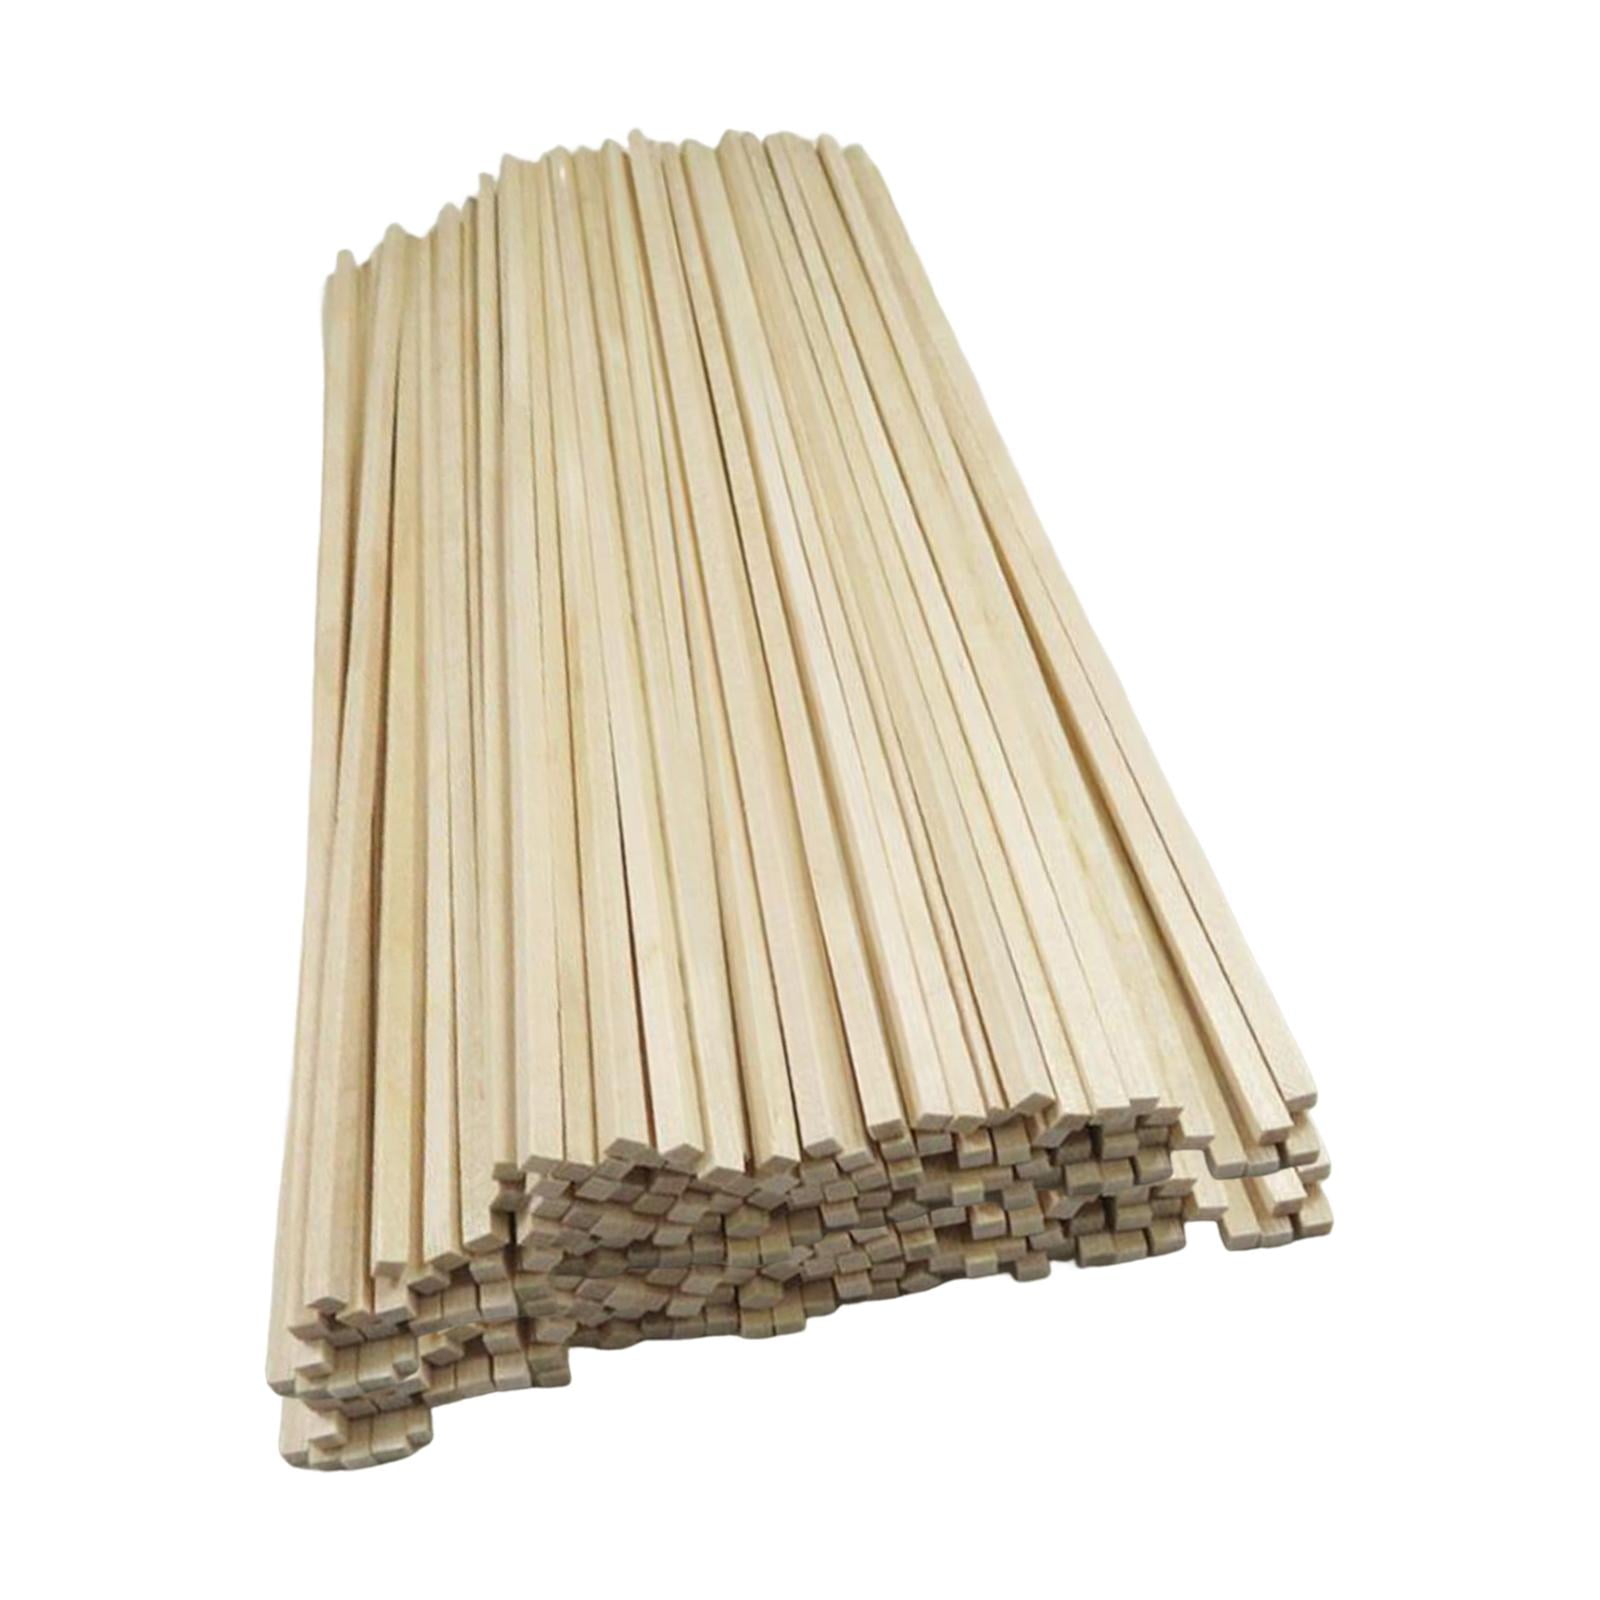 18pcs Unfinished Wooden Square Dowel Rod, Wood Strips Wooden Craft Sticks Square  Dowels For Crafts Model Making Diy Projects Home Decor, Free Shipping For  New Users